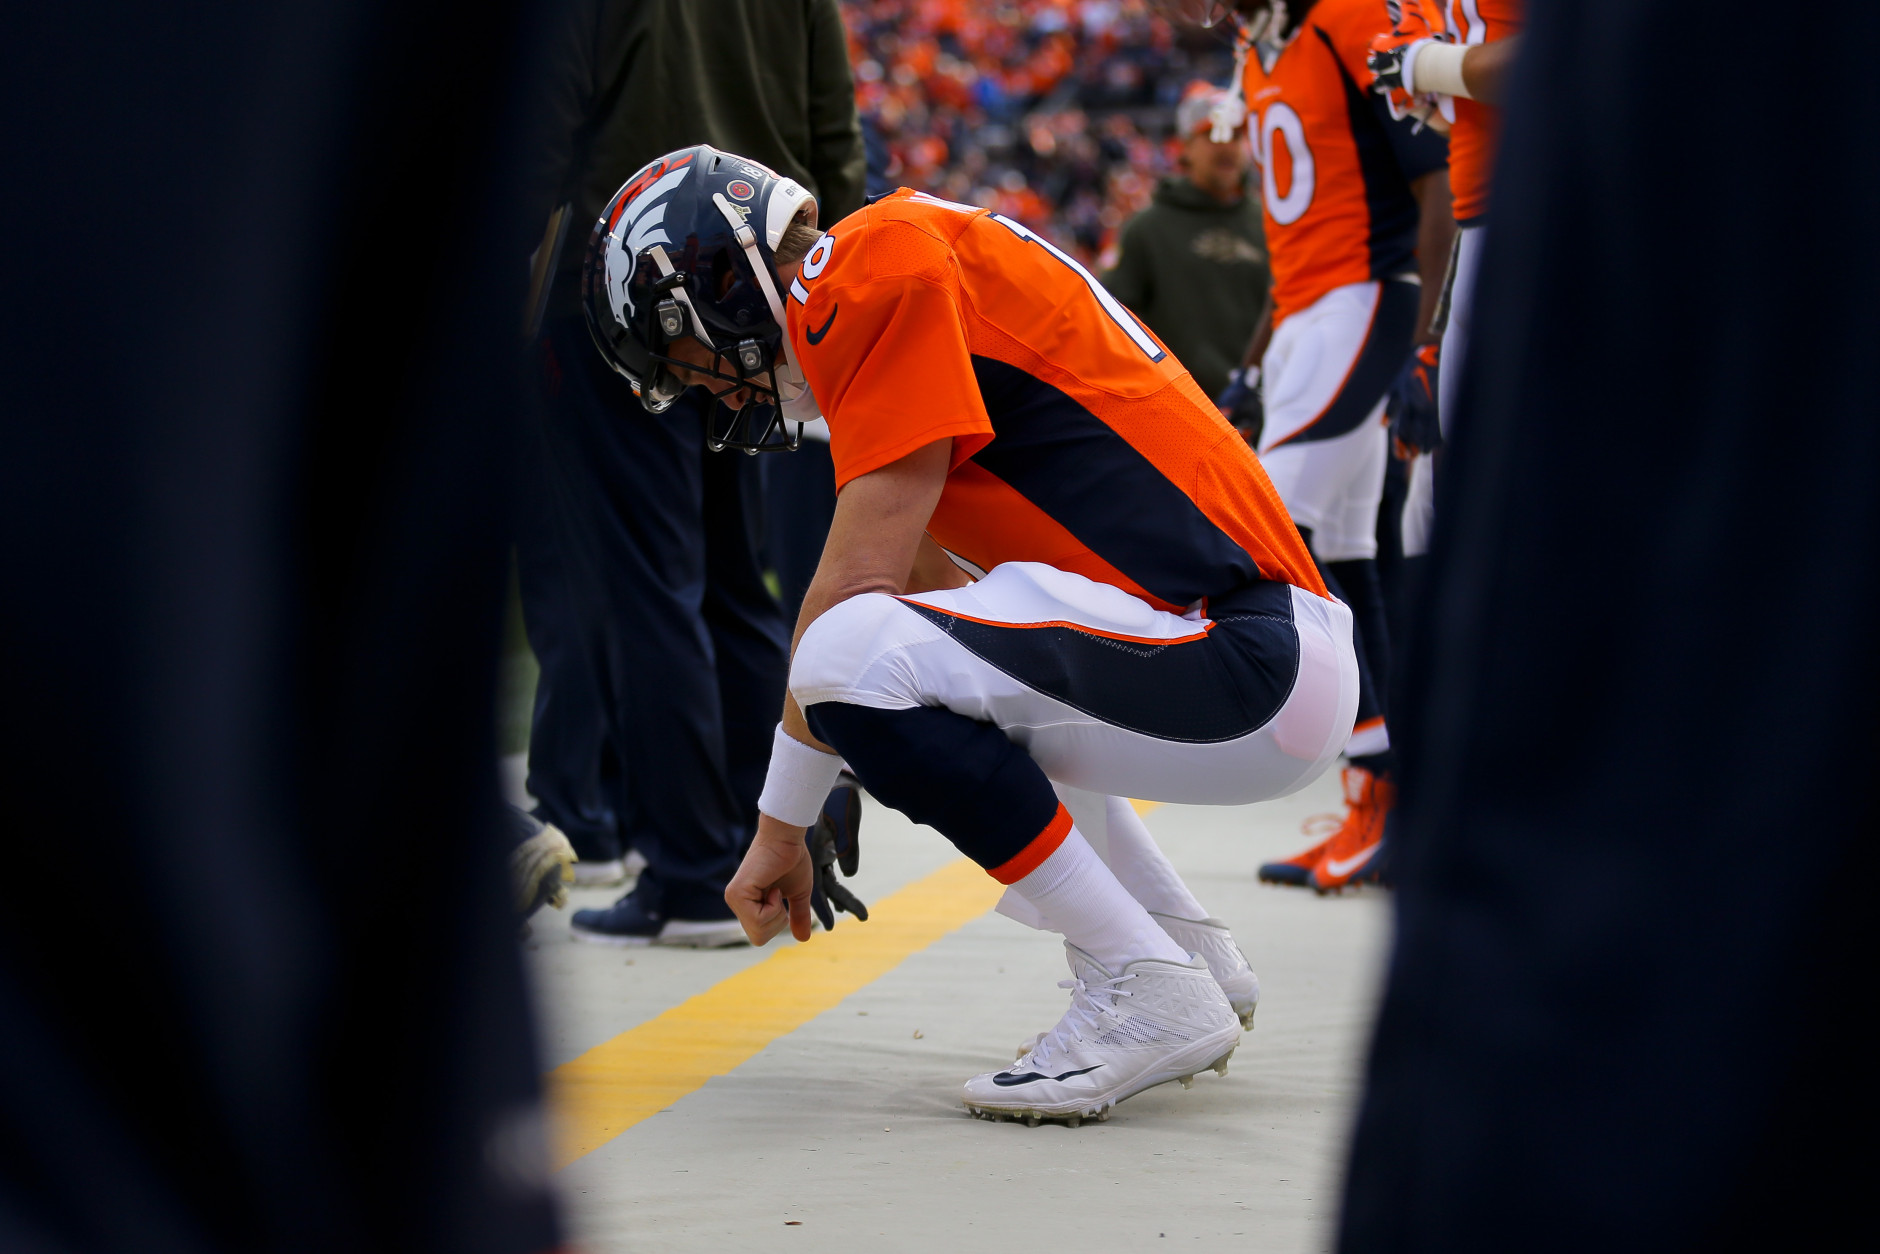 DENVER, CO - NOVEMBER 15:  Quarterback Peyton Manning #18 of the Denver Broncos crouches on the sidelines during a game against the Kansas City Chiefs at Sports Authority Field Field at Mile High on November 15, 2015 in Denver, Colorado. (Photo by Justin Edmonds/Getty Images)